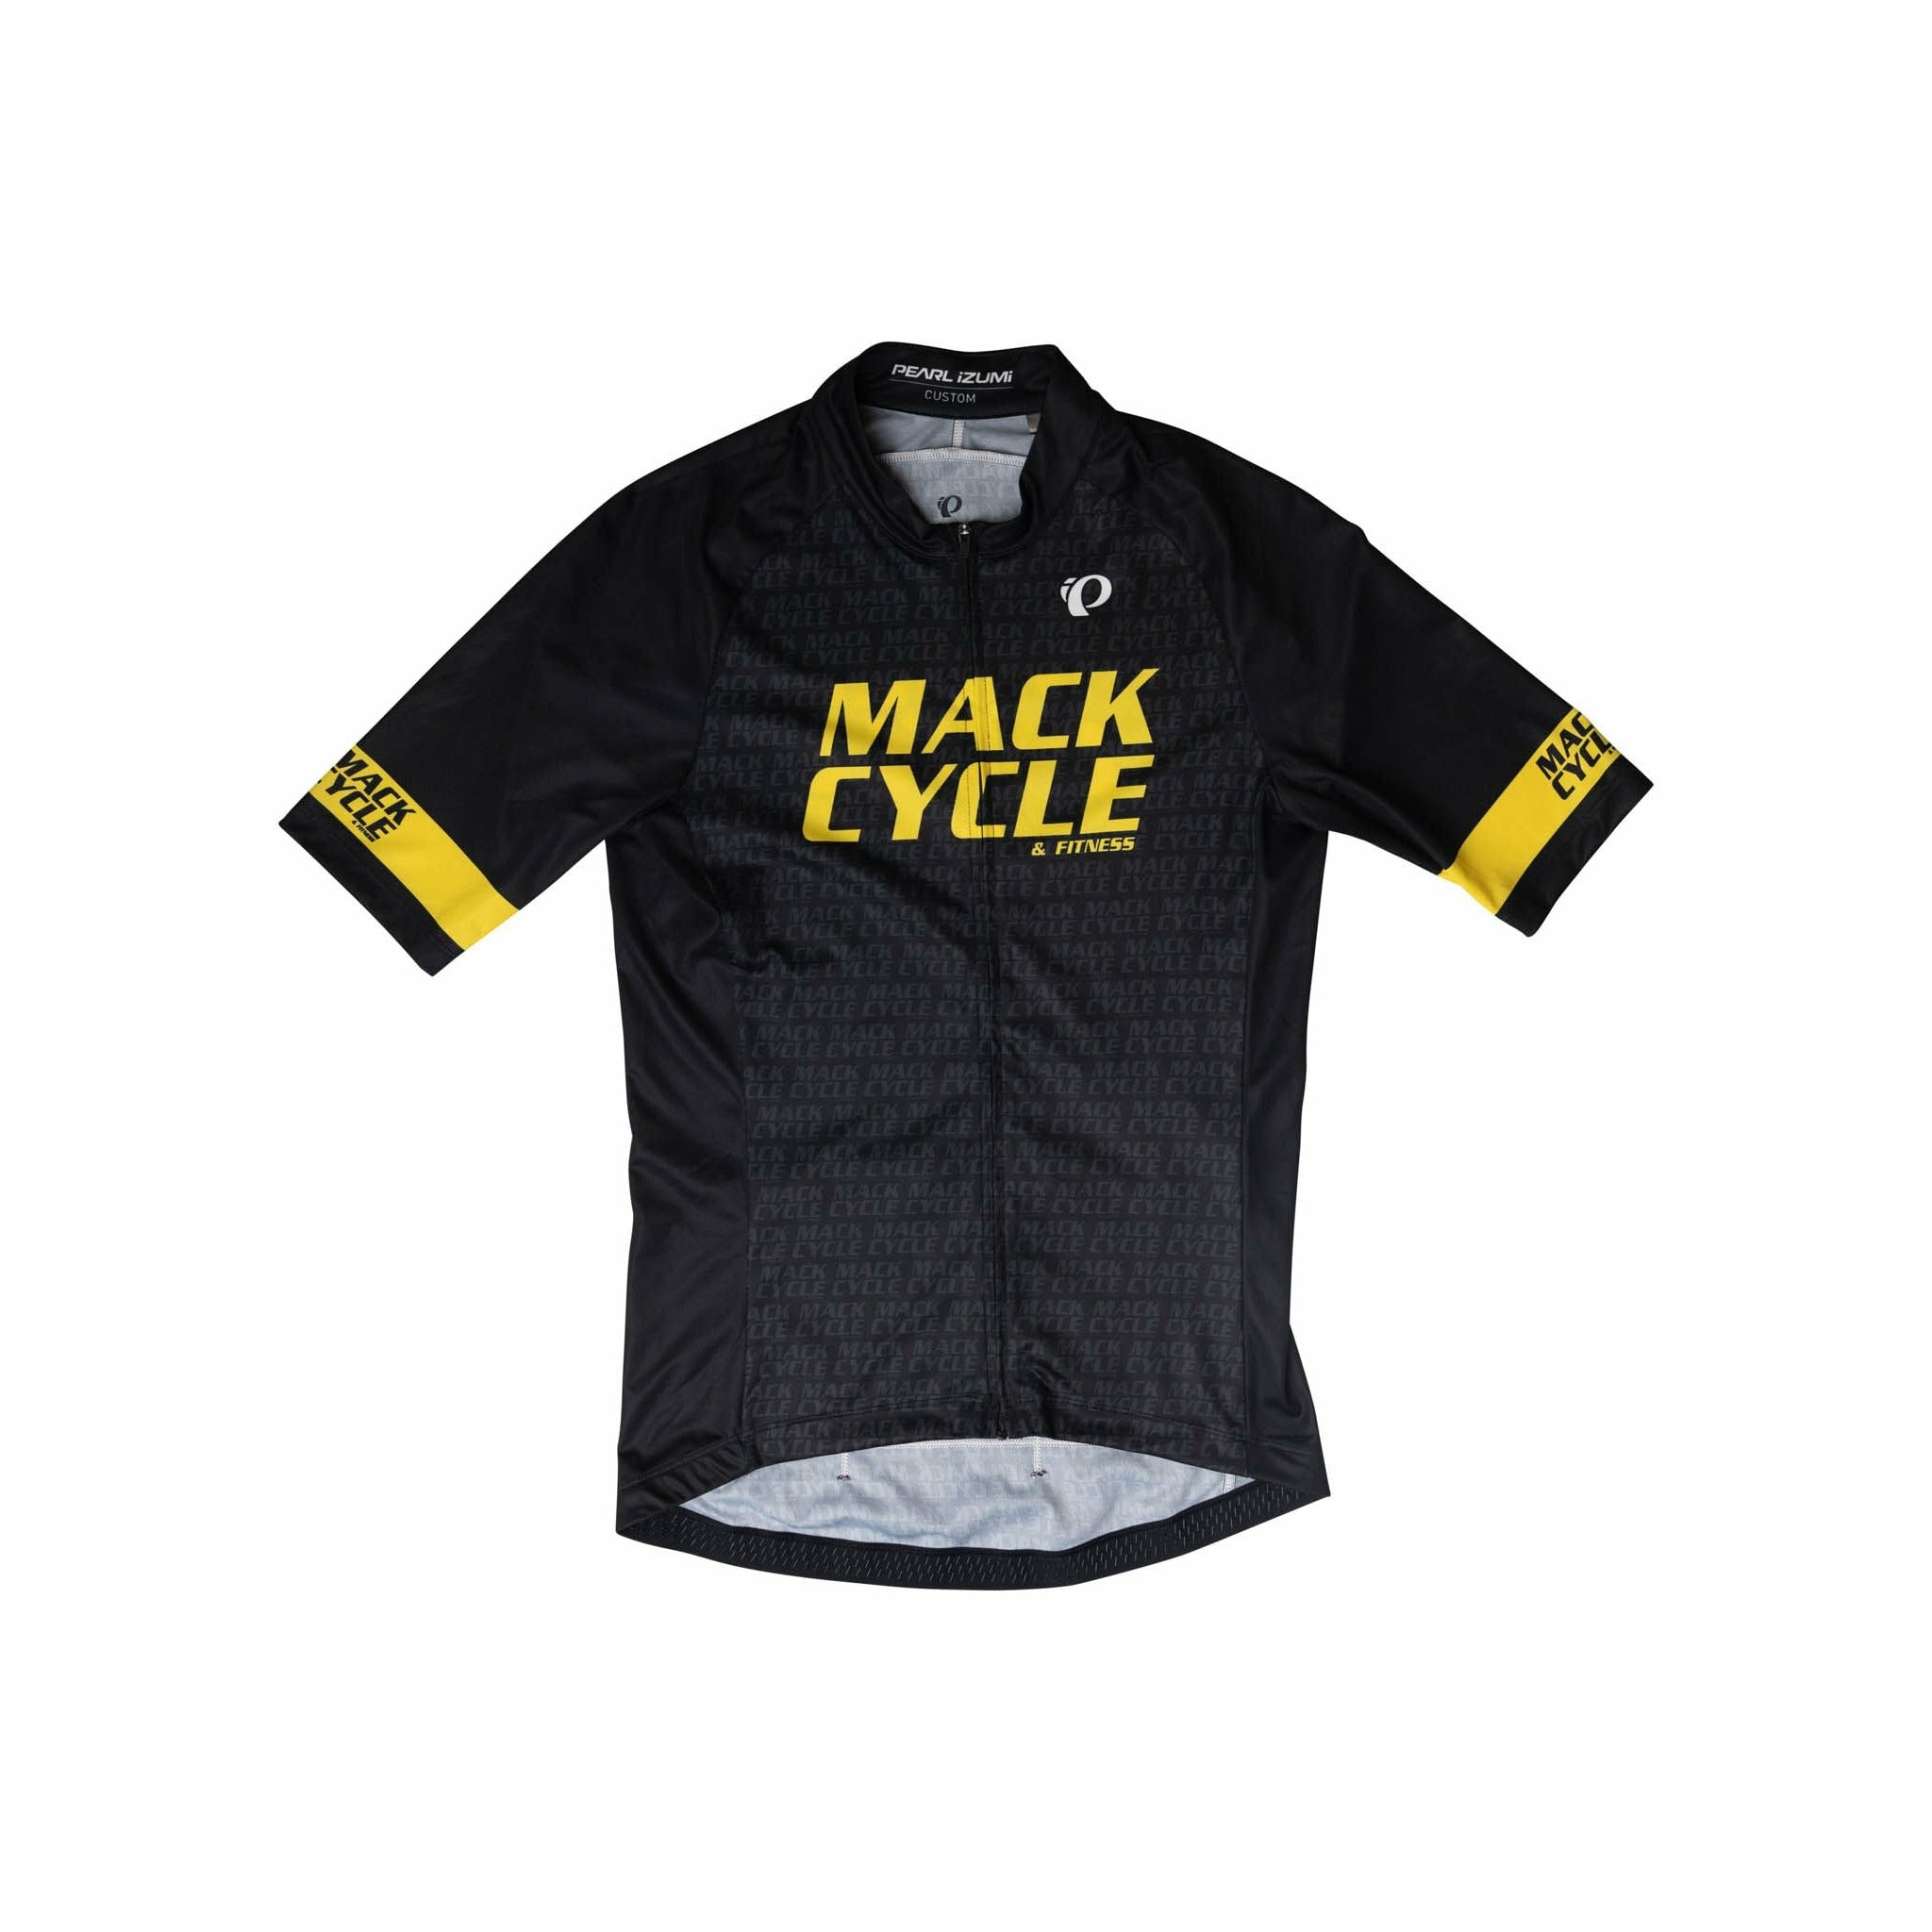 Pearl Izumi Mack Cycle Men's Attack Cycling Jersey – Mack Cycle & Fitness